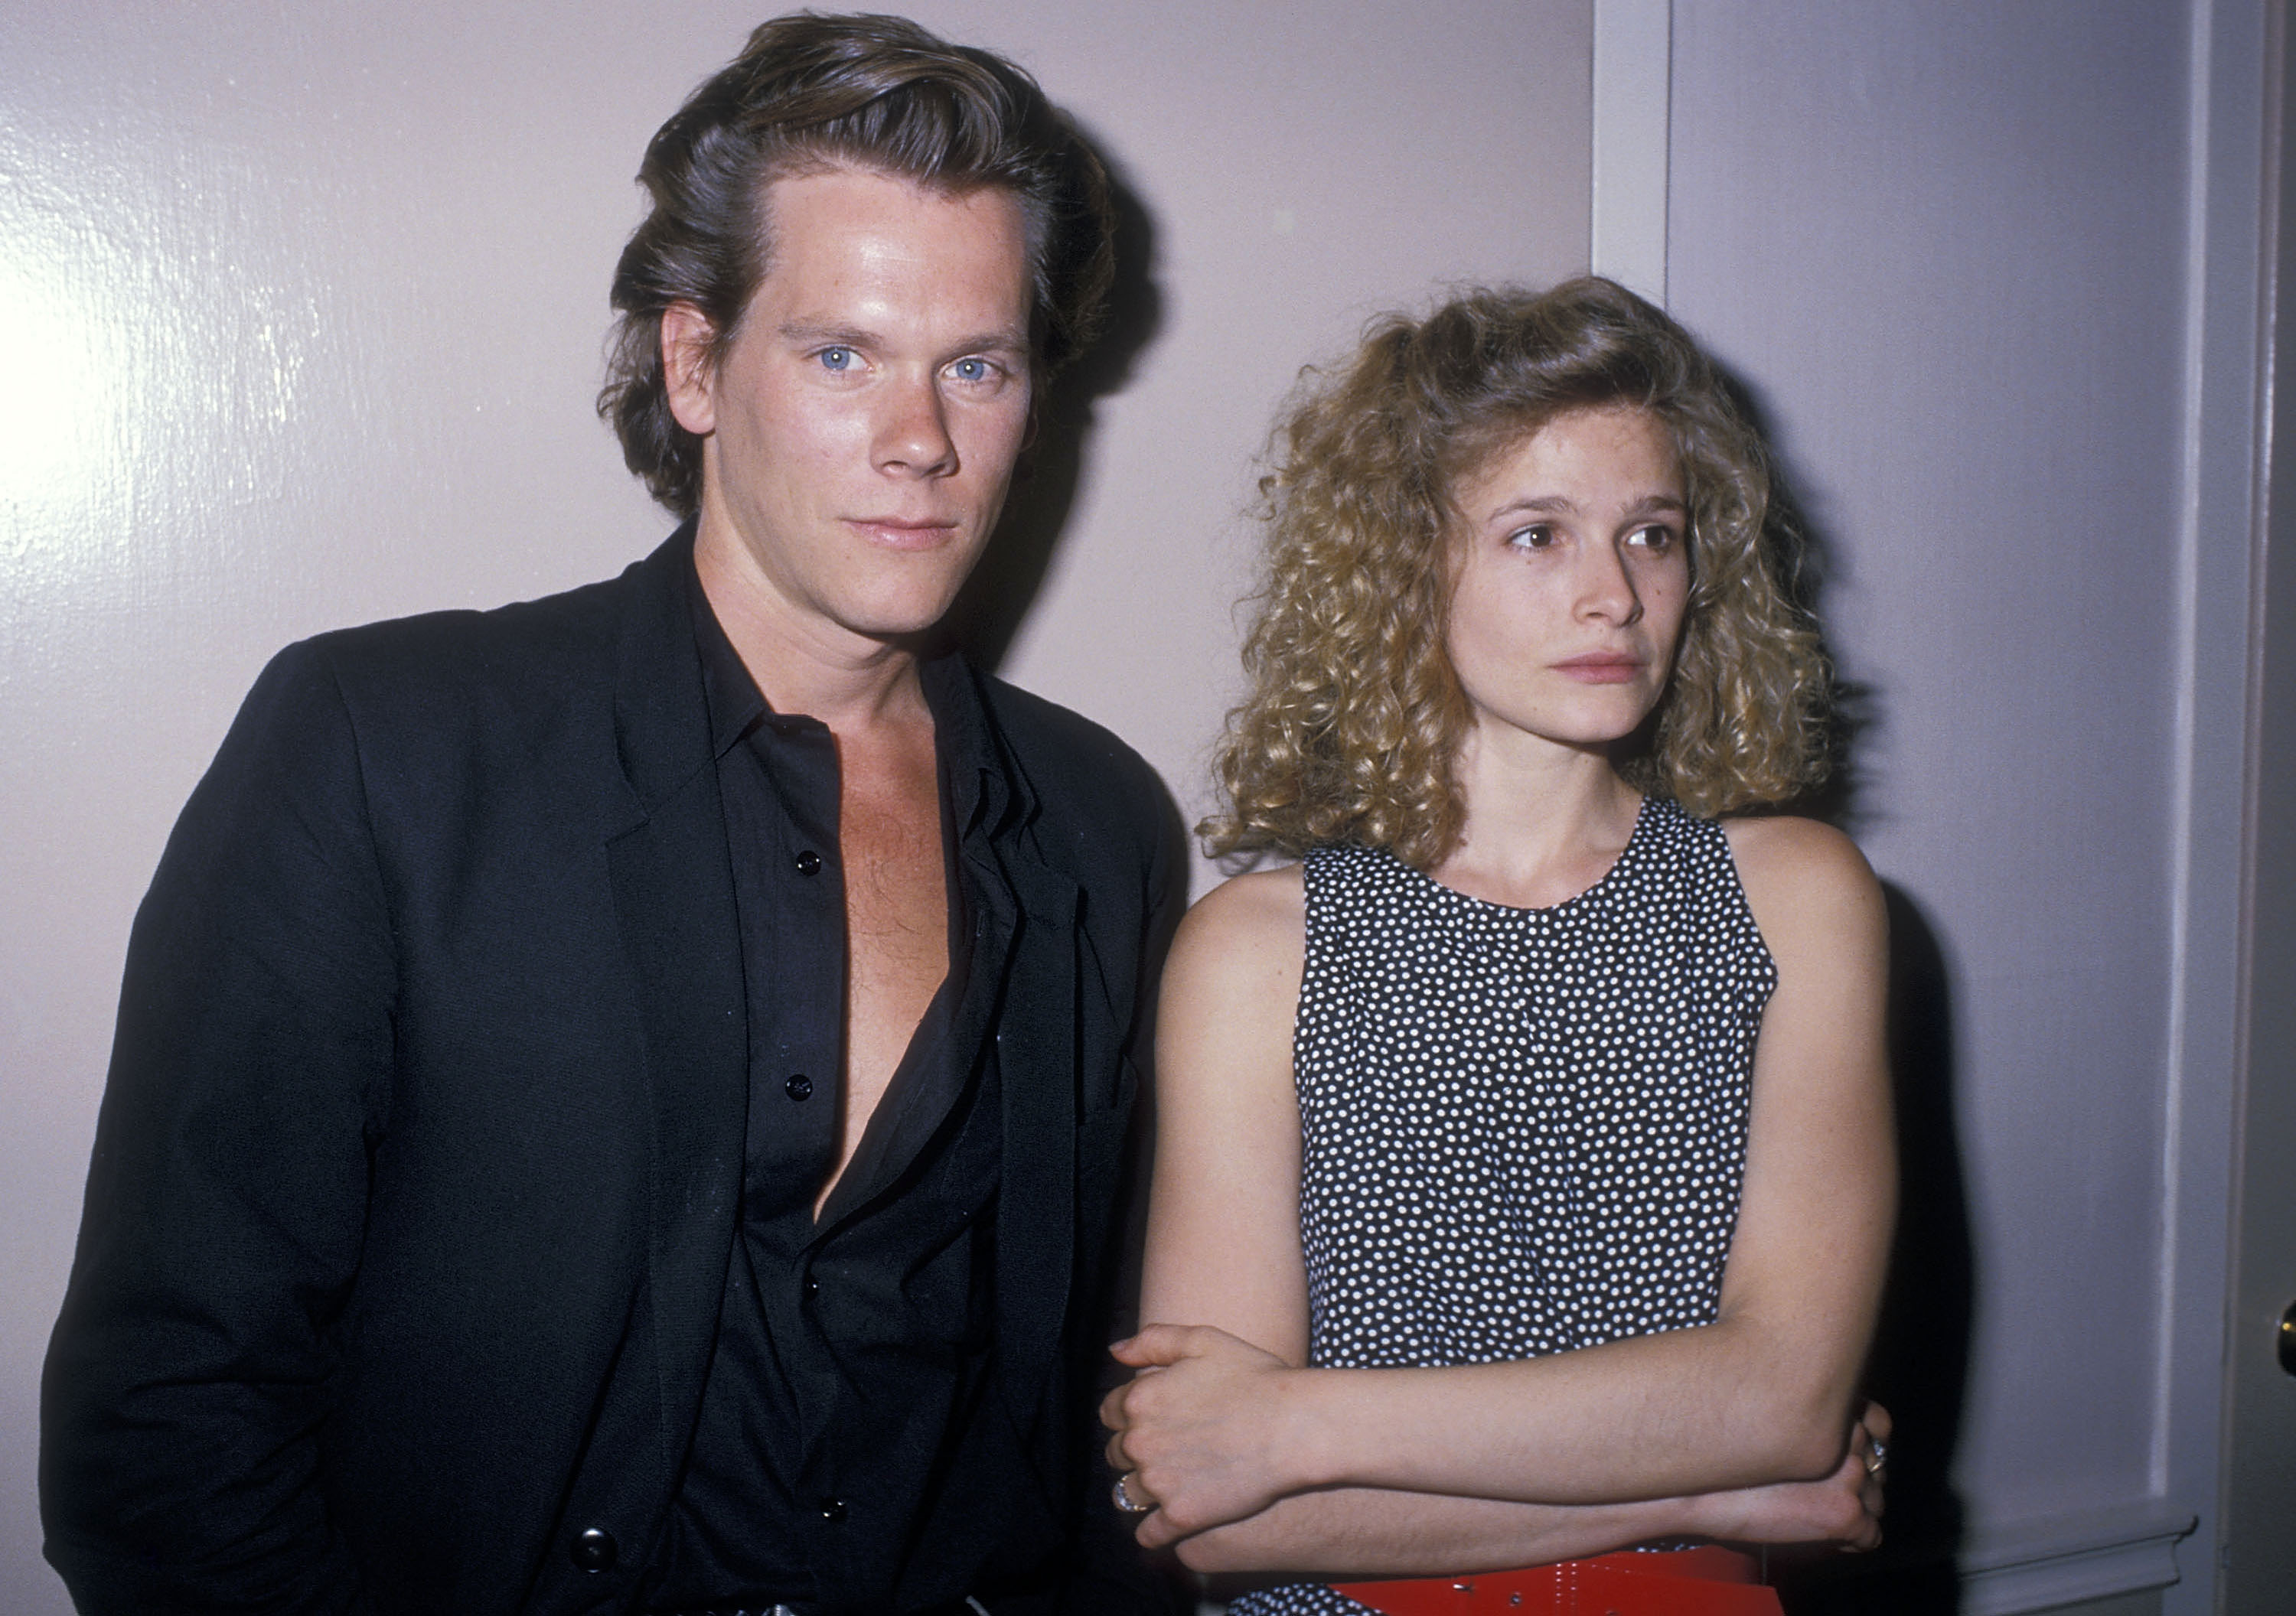 Kevin Bacon and Kyra Sedgwick on June 14, 1988 in New York City | Source: Getty Images